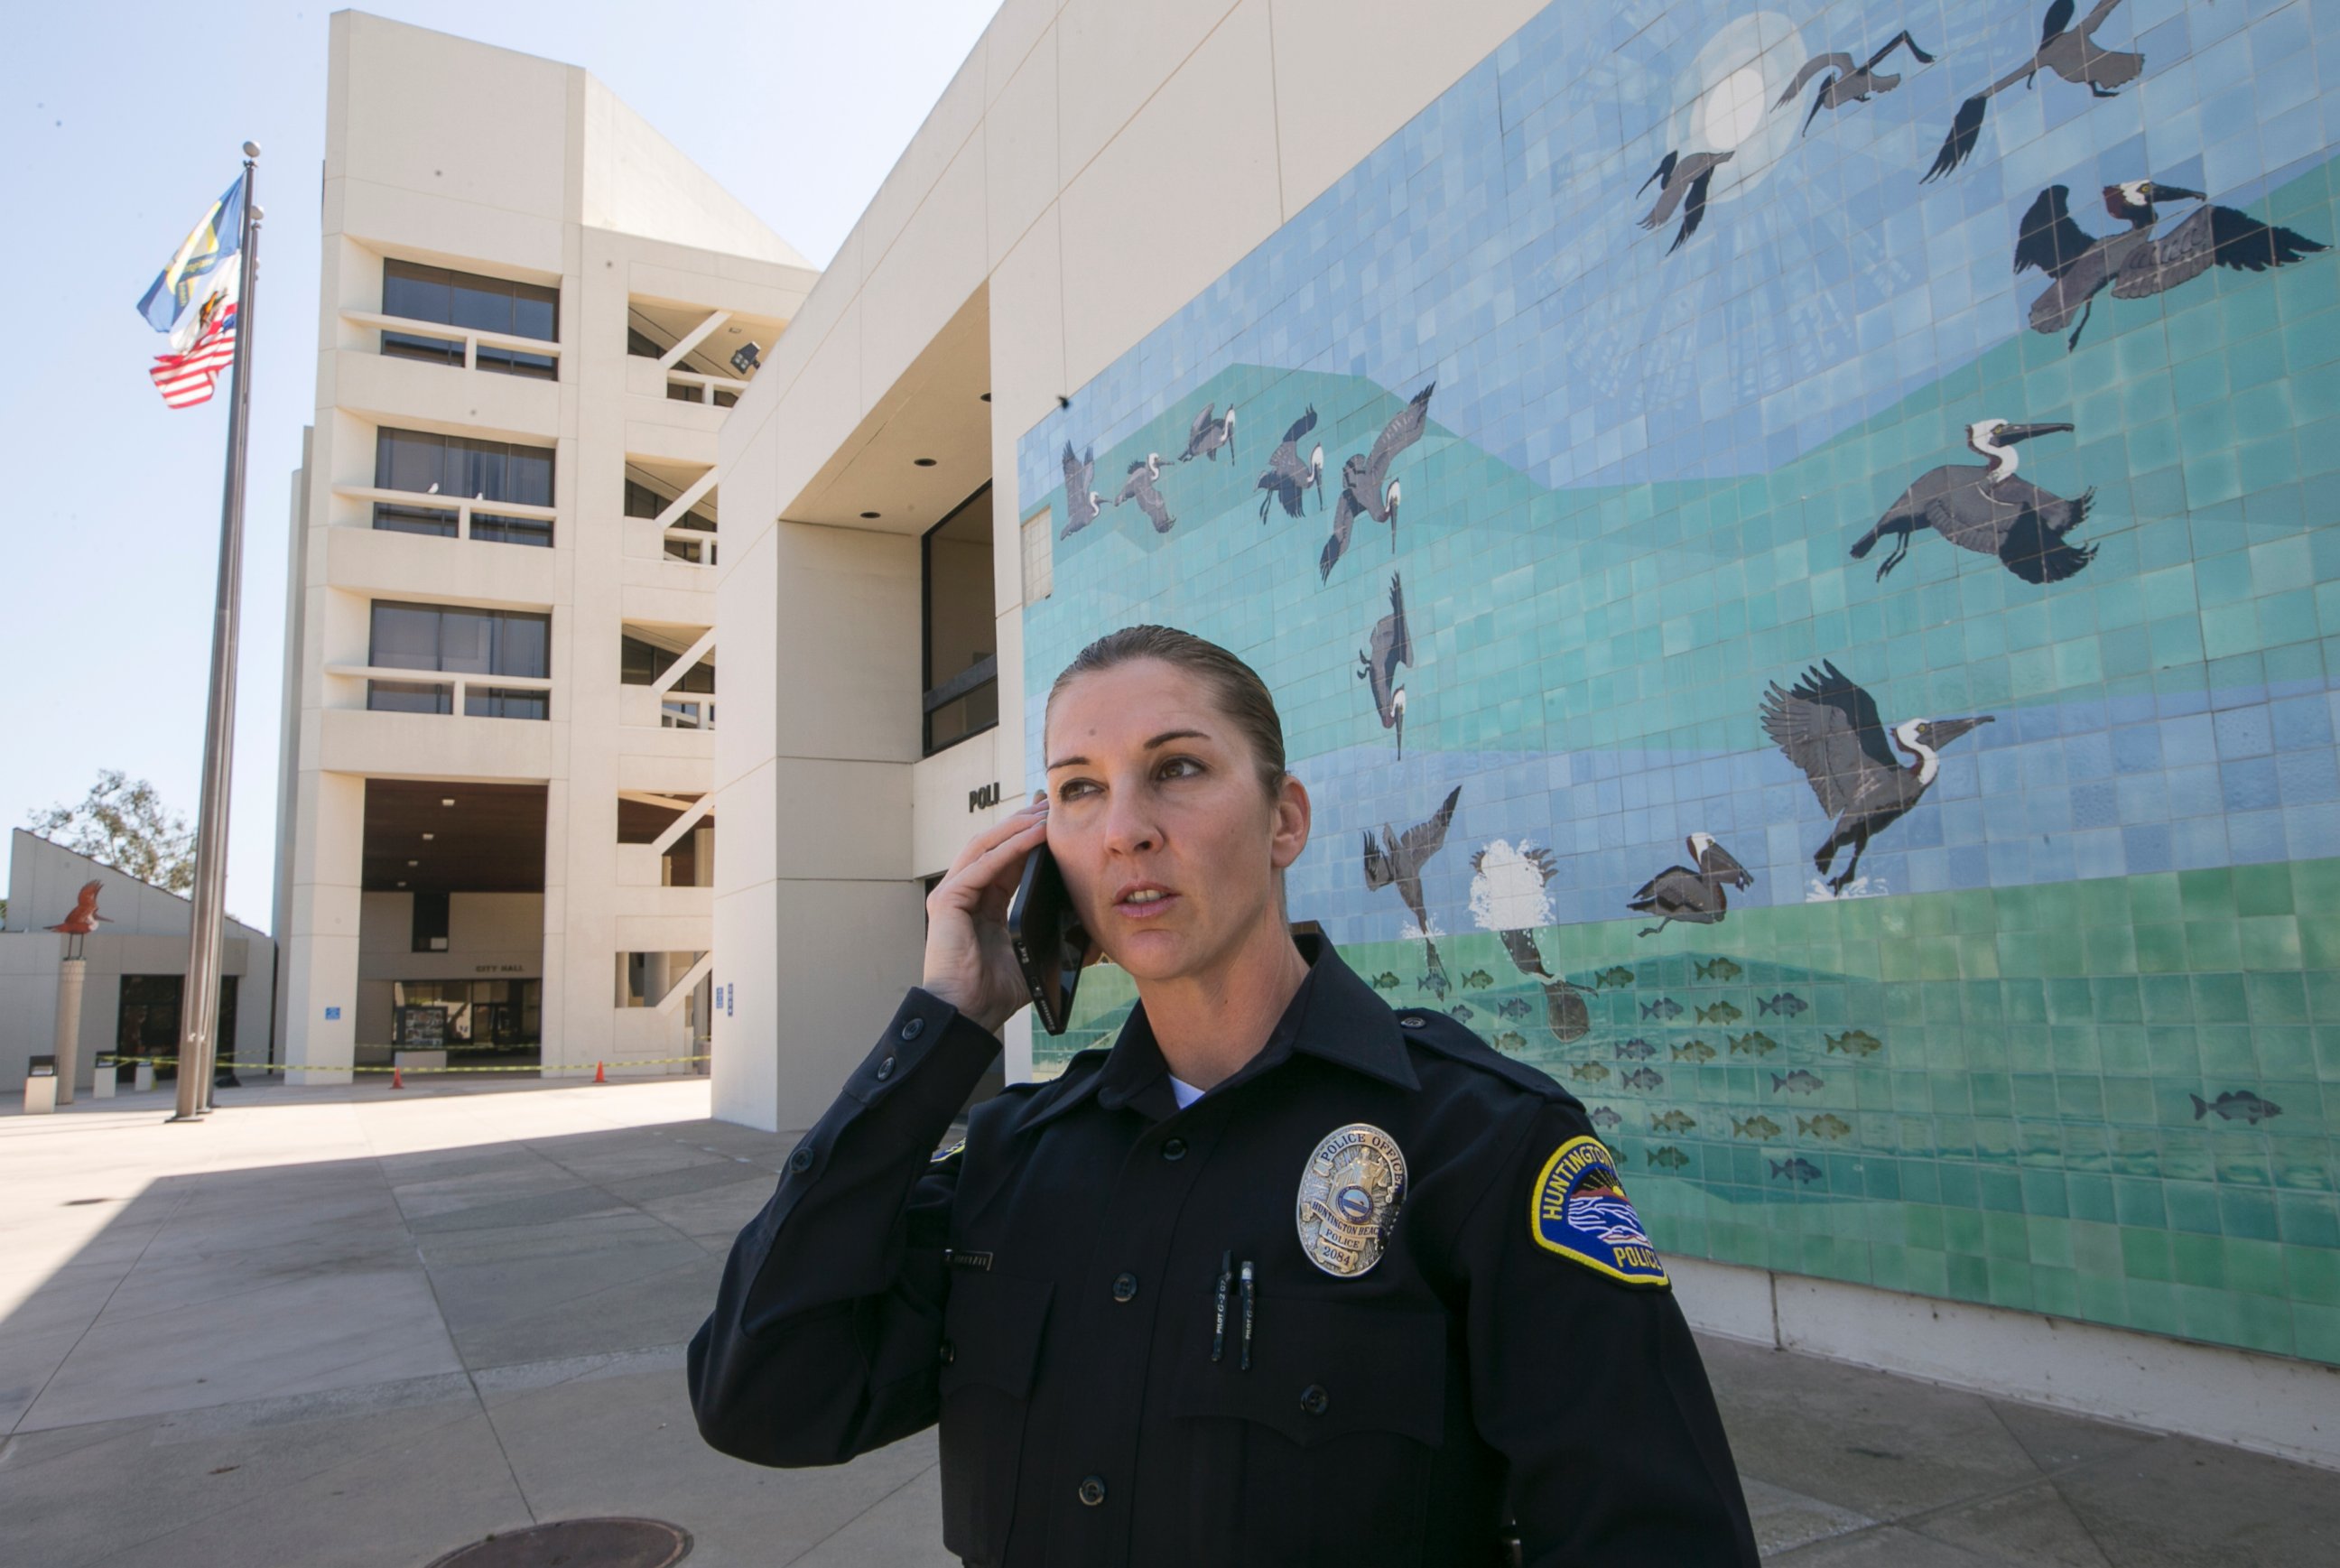 PHOTO: A police officer stands at the location where Denise Huskins, who had been reported missing, was found in Huntington Beach, Calif., March 25, 2015.  